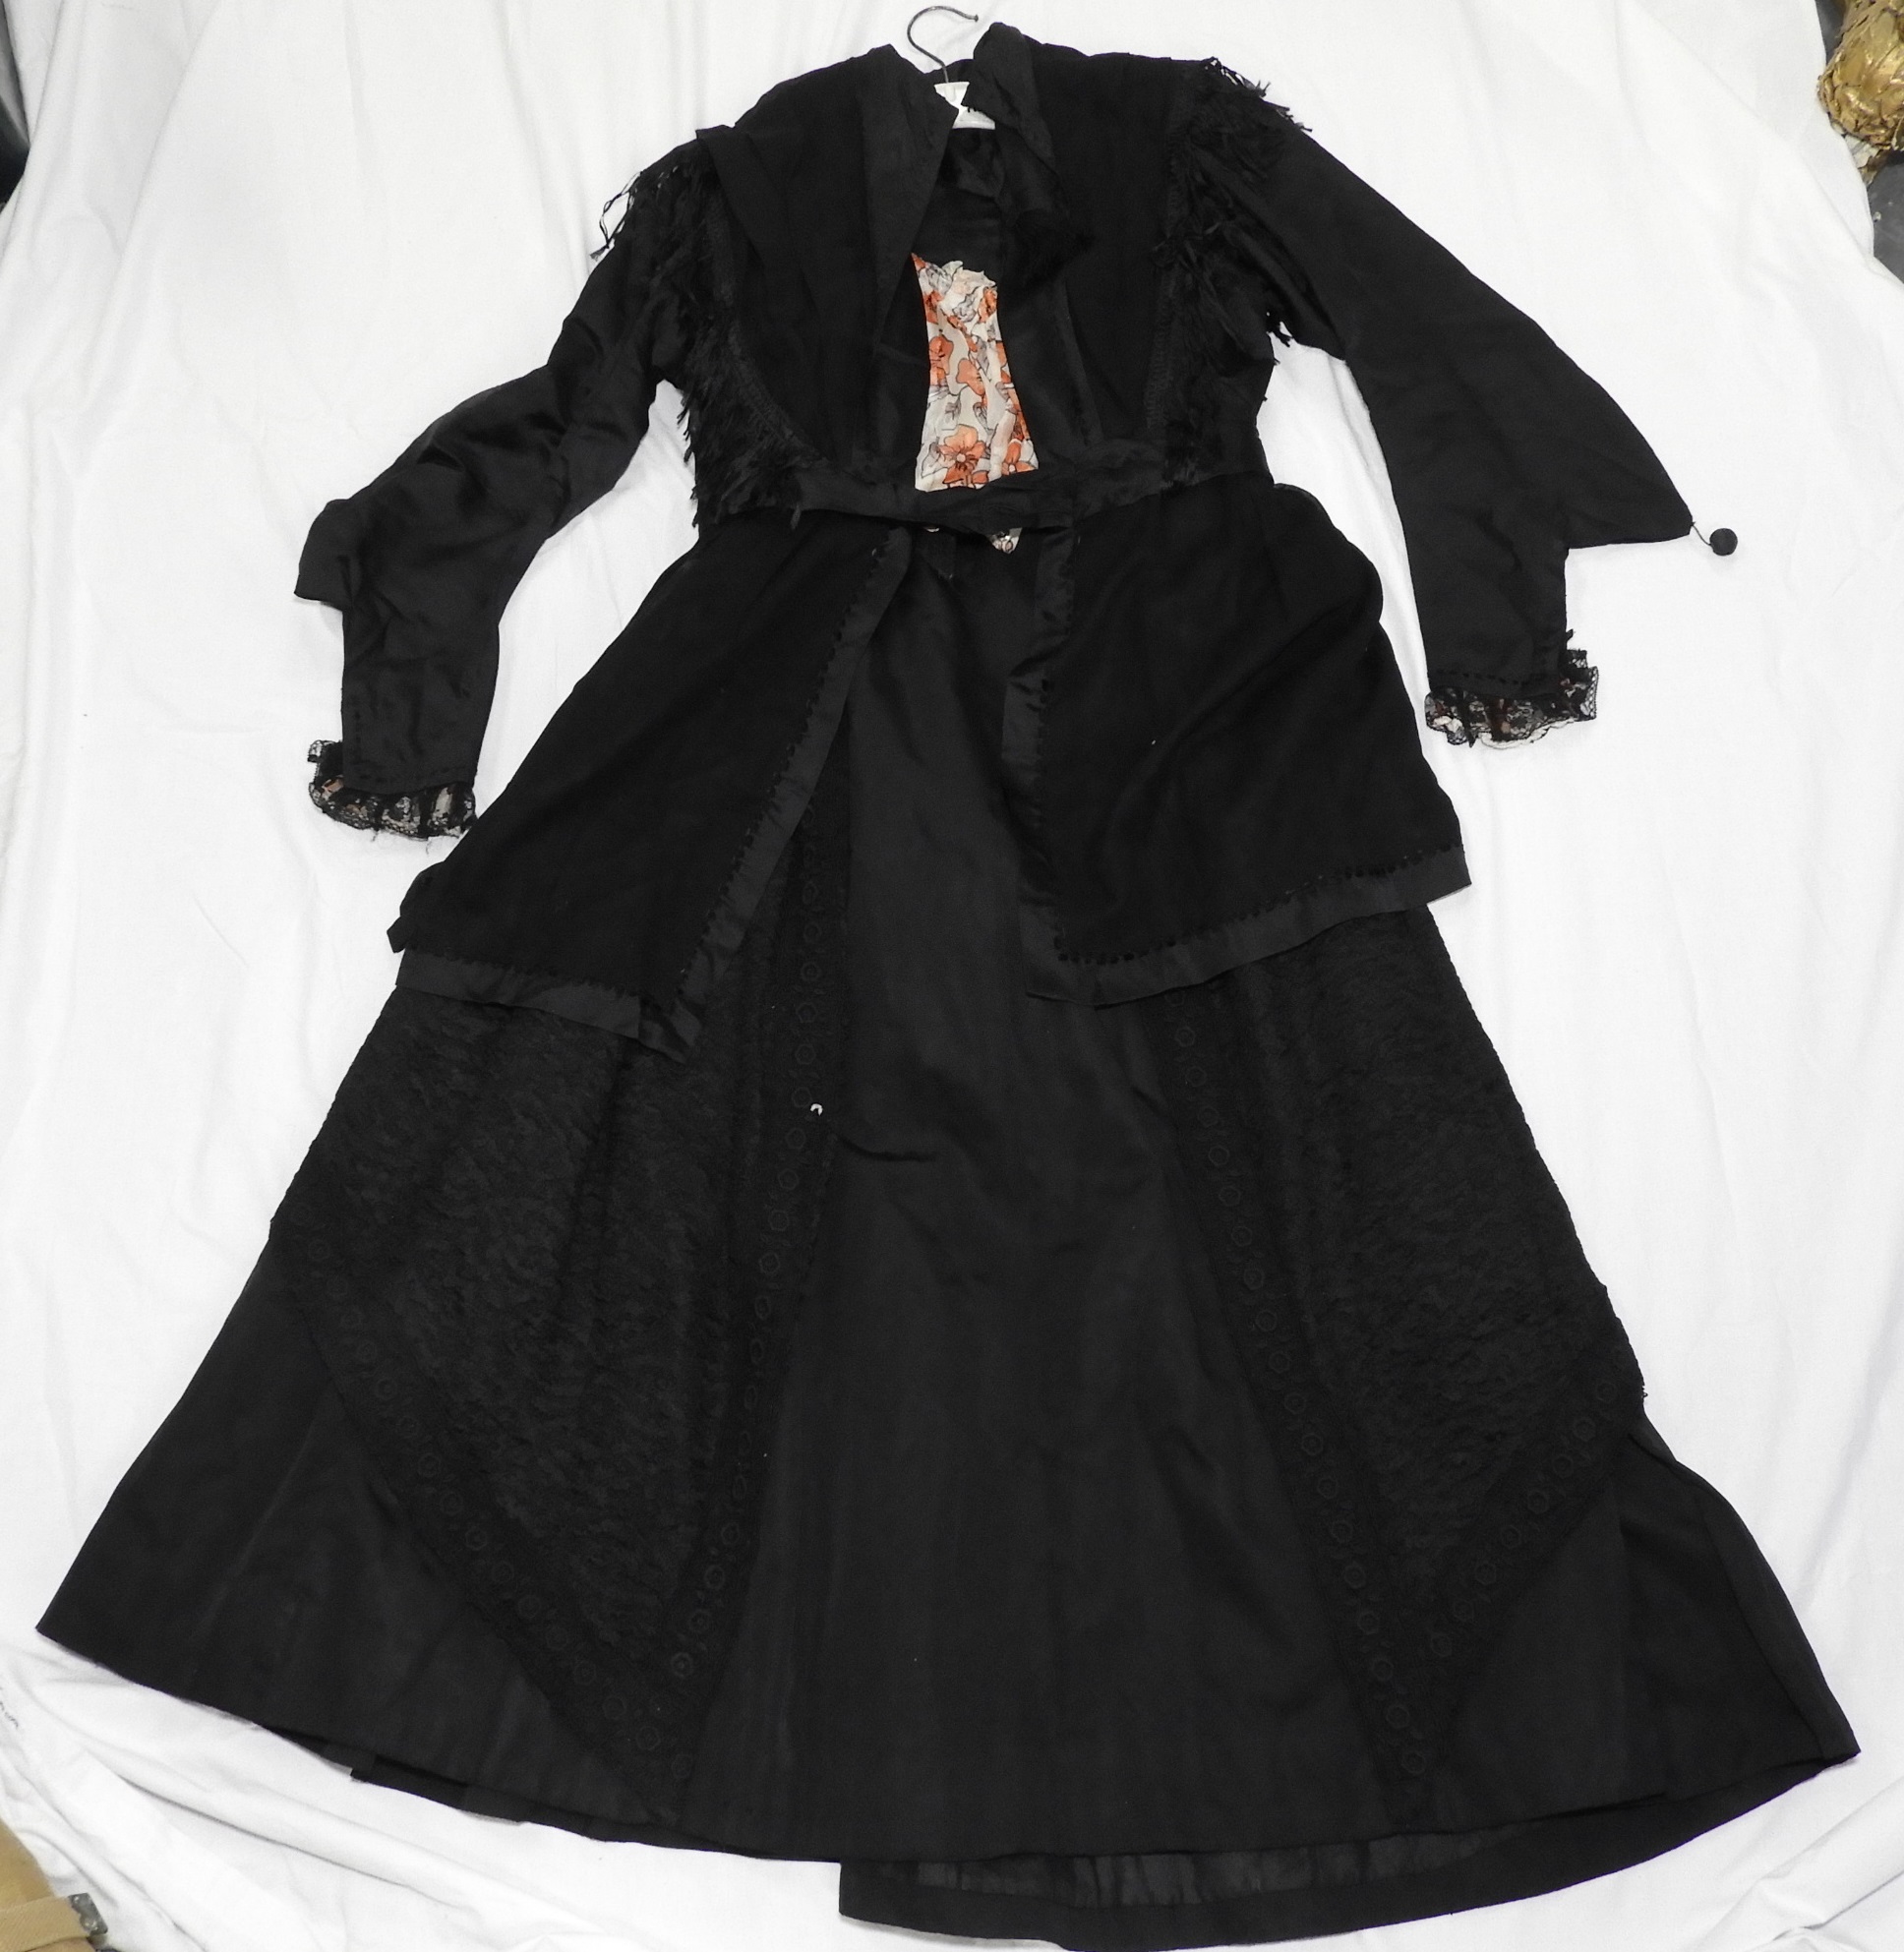 EDWARDIAN LADIES SILKEN DAY DRESS + CORSETTED JACKET WITH LACE BLOUSE INSET, BRAIDED WITH LACE EDGED